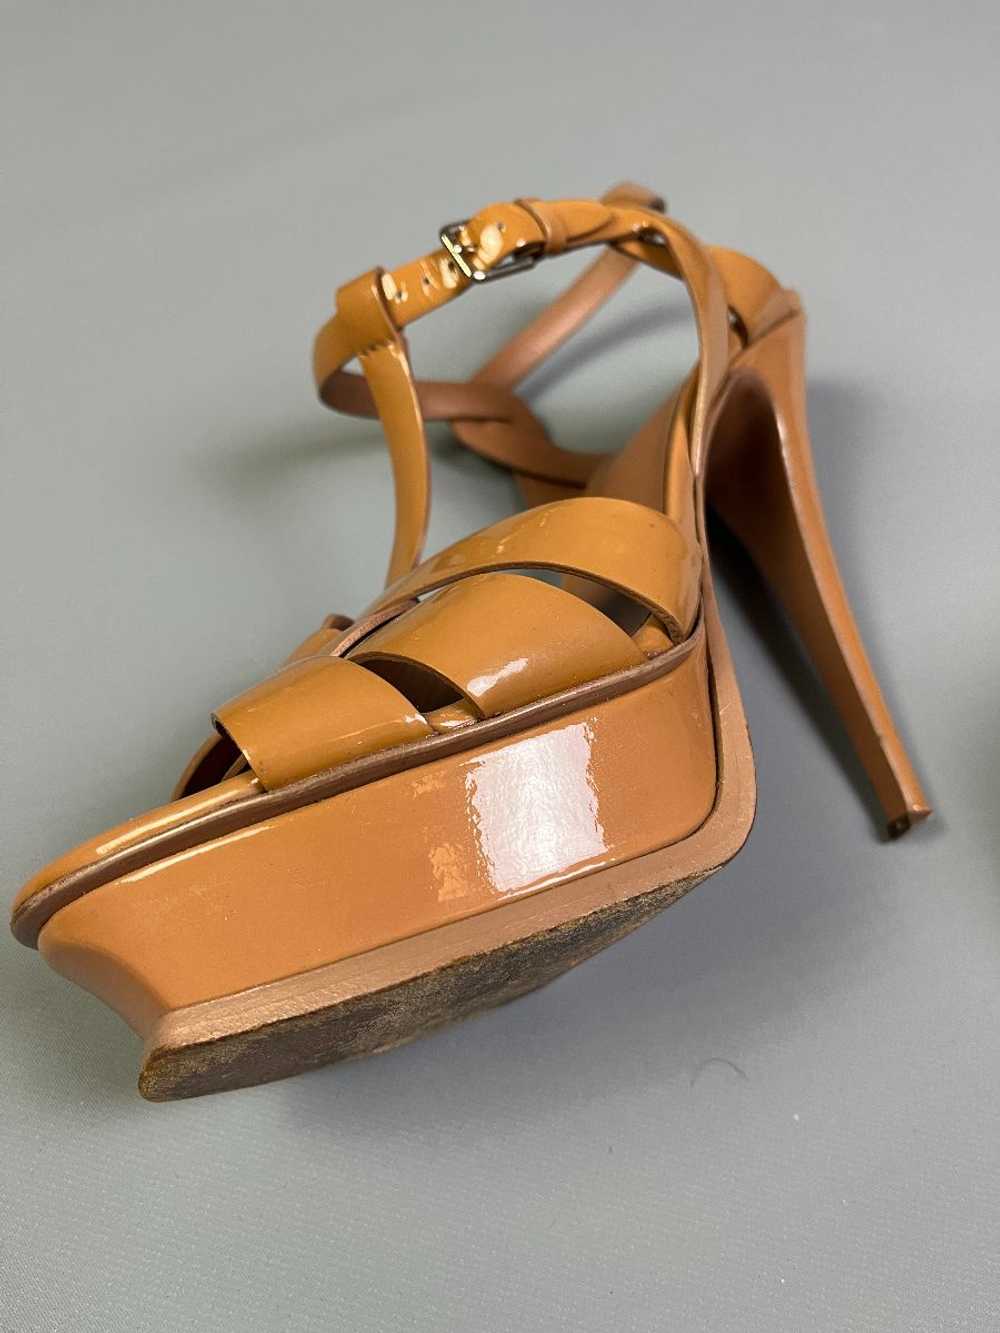 YSL NUDE PATENT LEATHER STRAPPY HEELS WRAP AROUND… - image 8